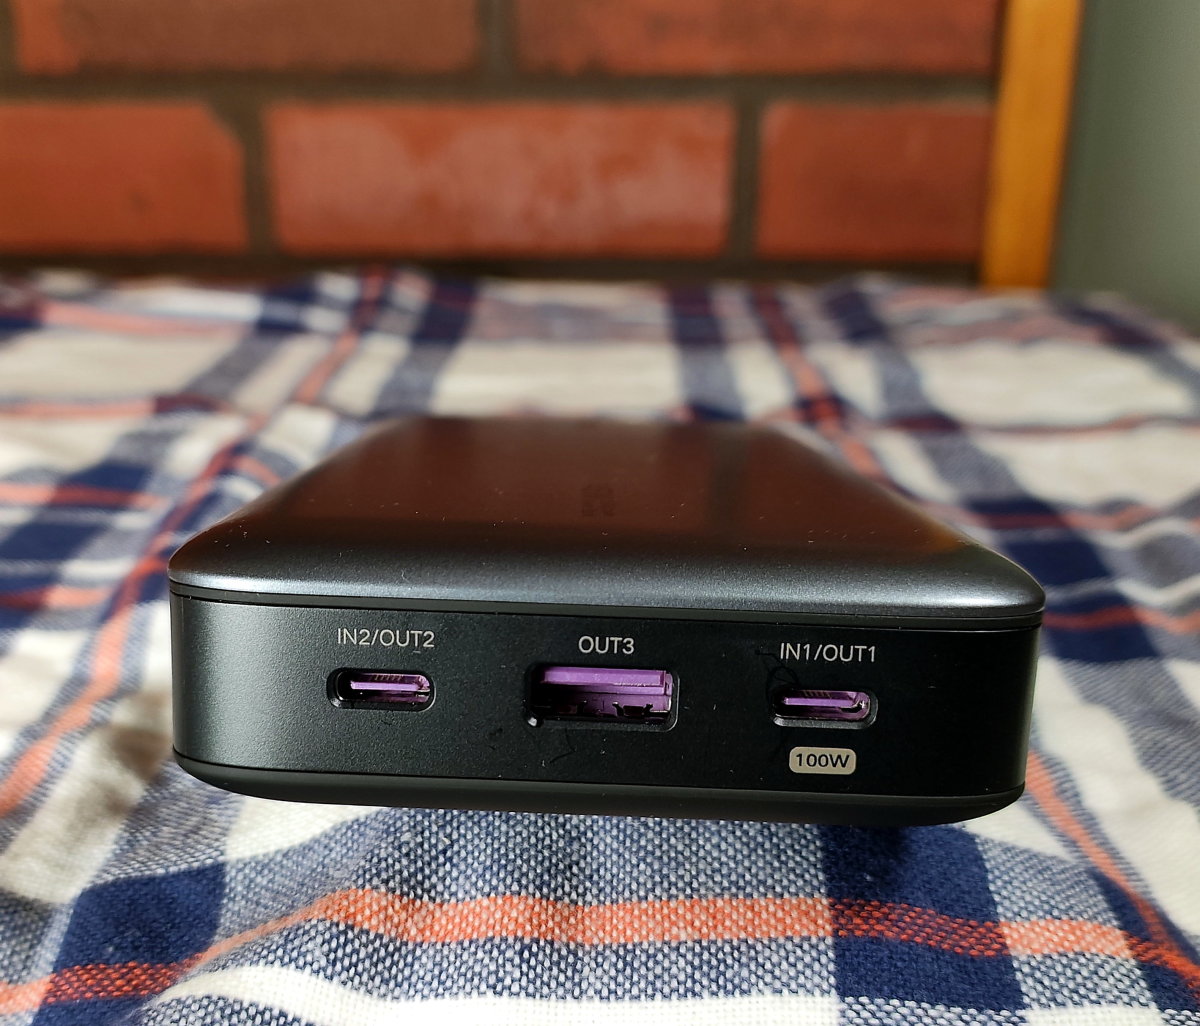 Review of the UGREEN 145W Power Bank